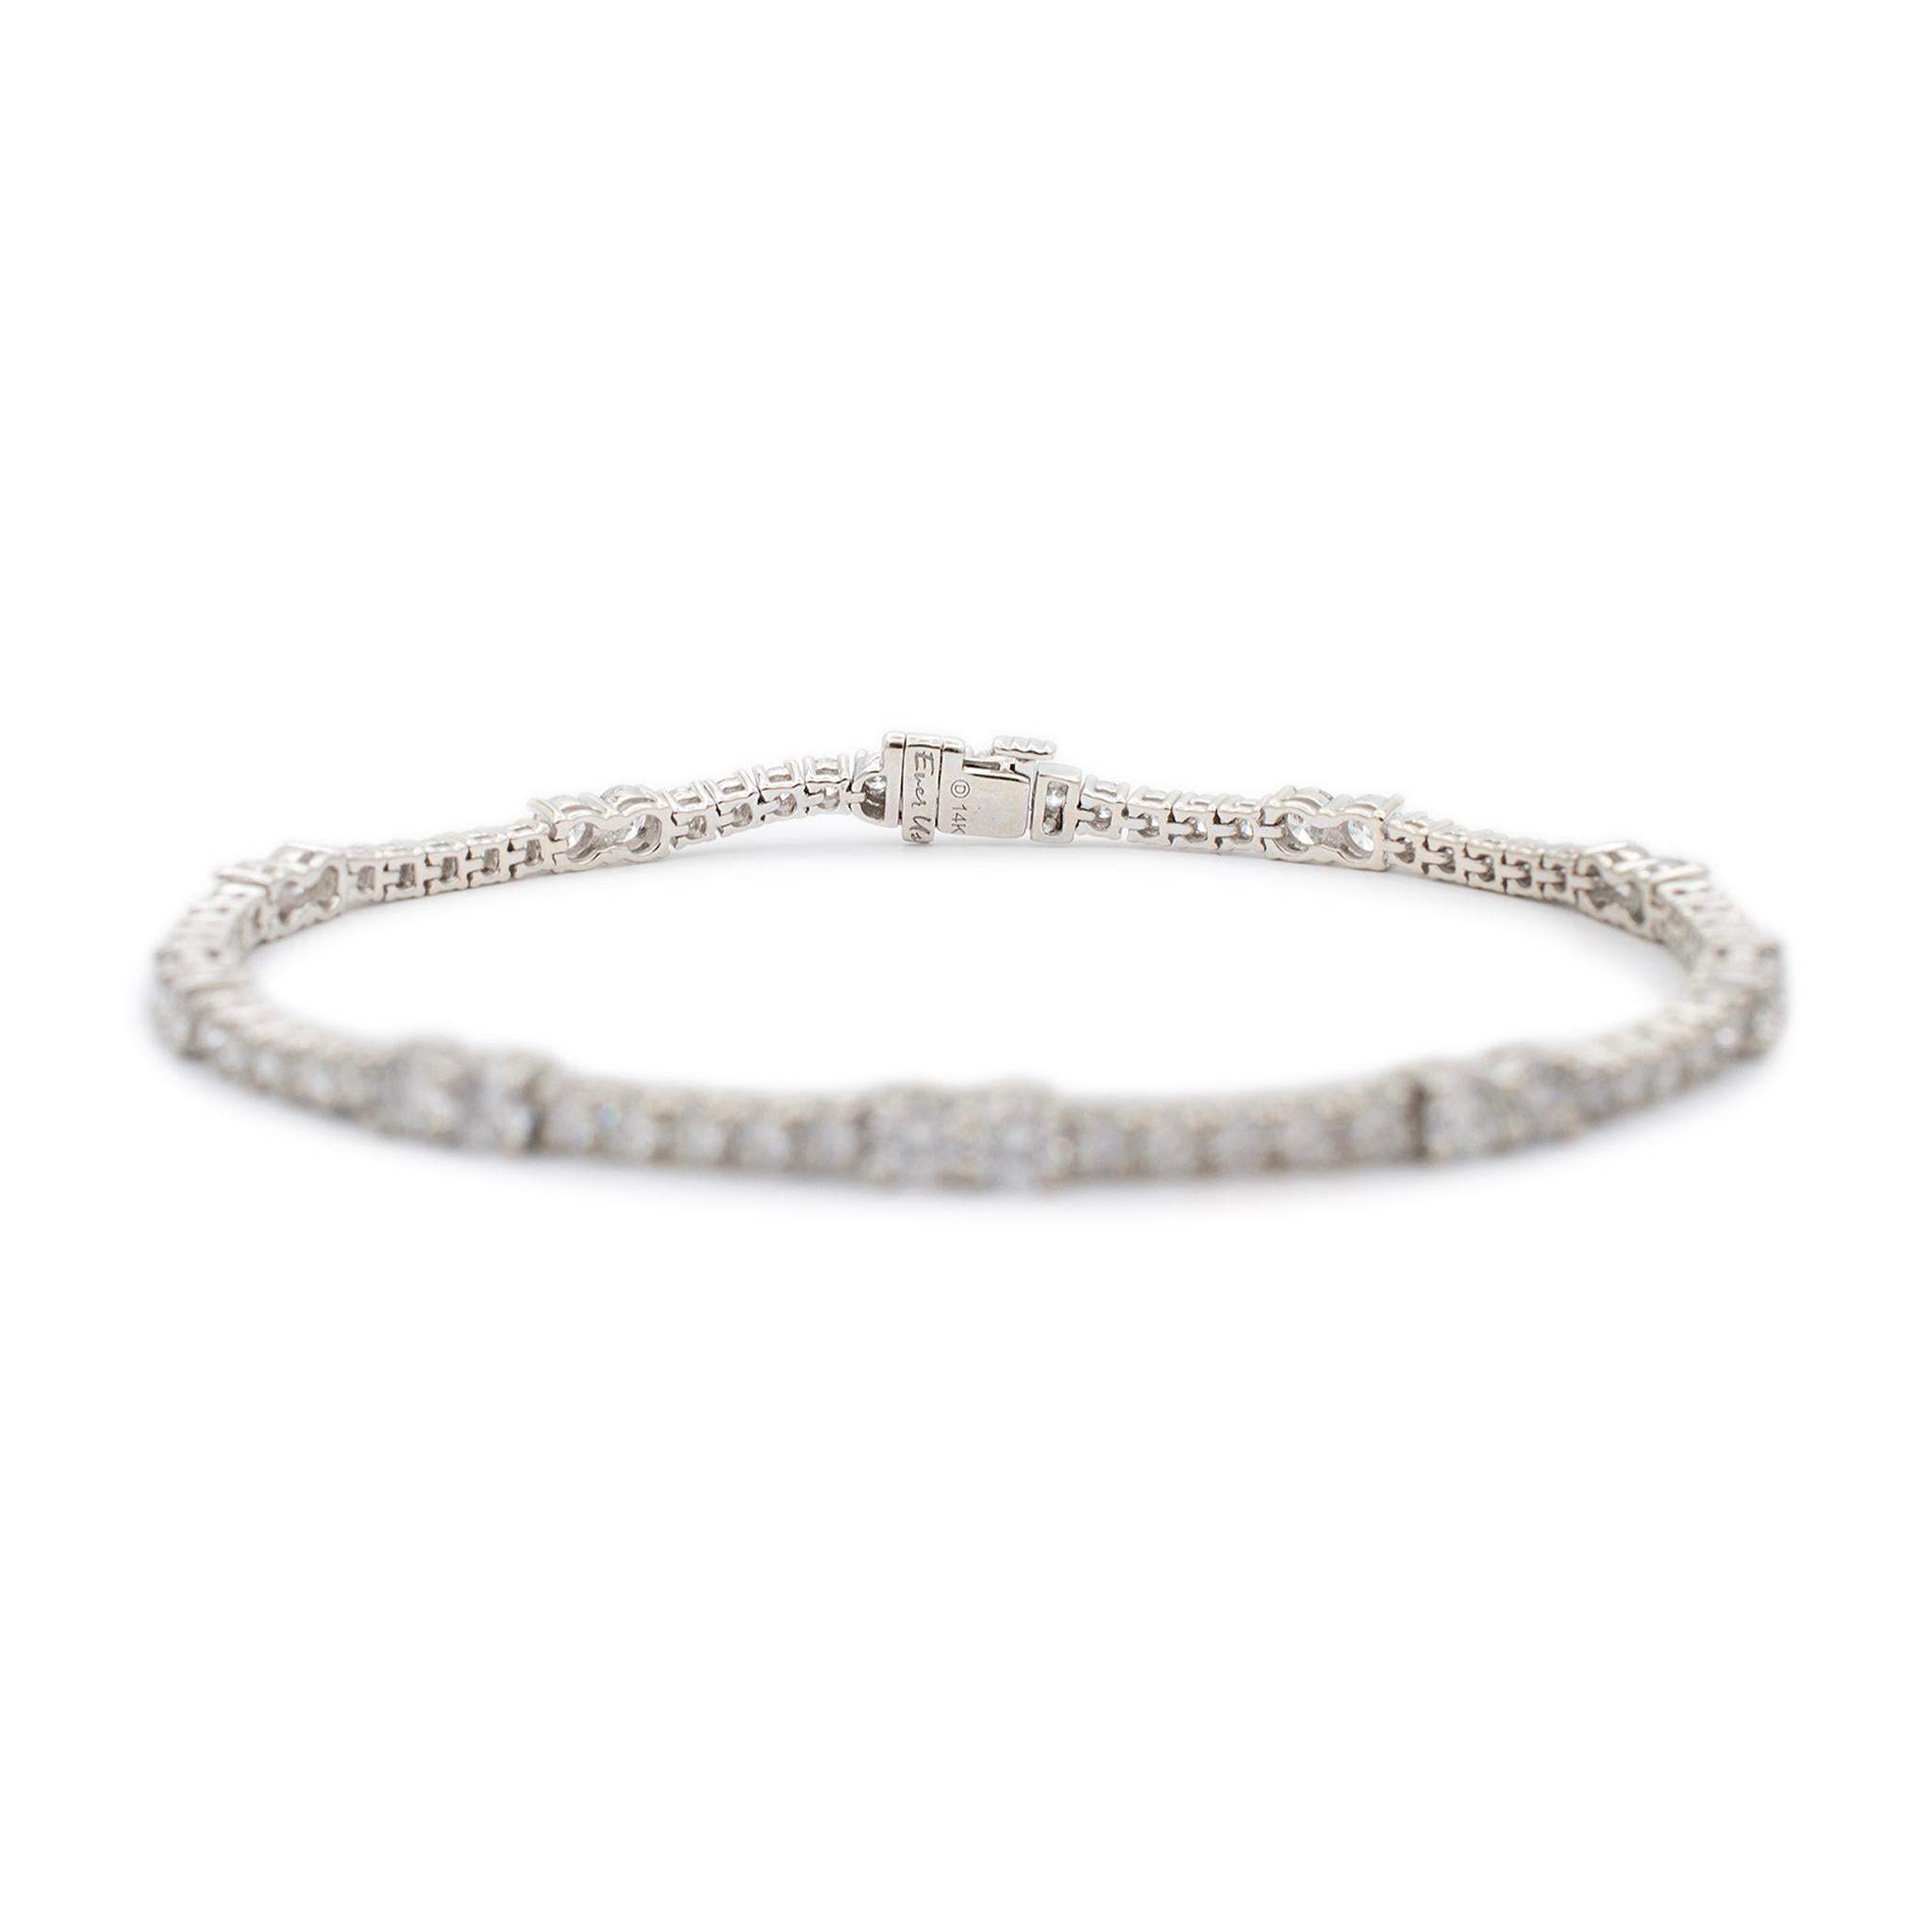 Metal Type: 14K White Gold

Length: 7.50 inches

Width: 3.30 mm

Weight: 10.10 grams

Alternate design diamond tennis bracelet. The metal was tested and determined to be 14K white gold. Engraved with 